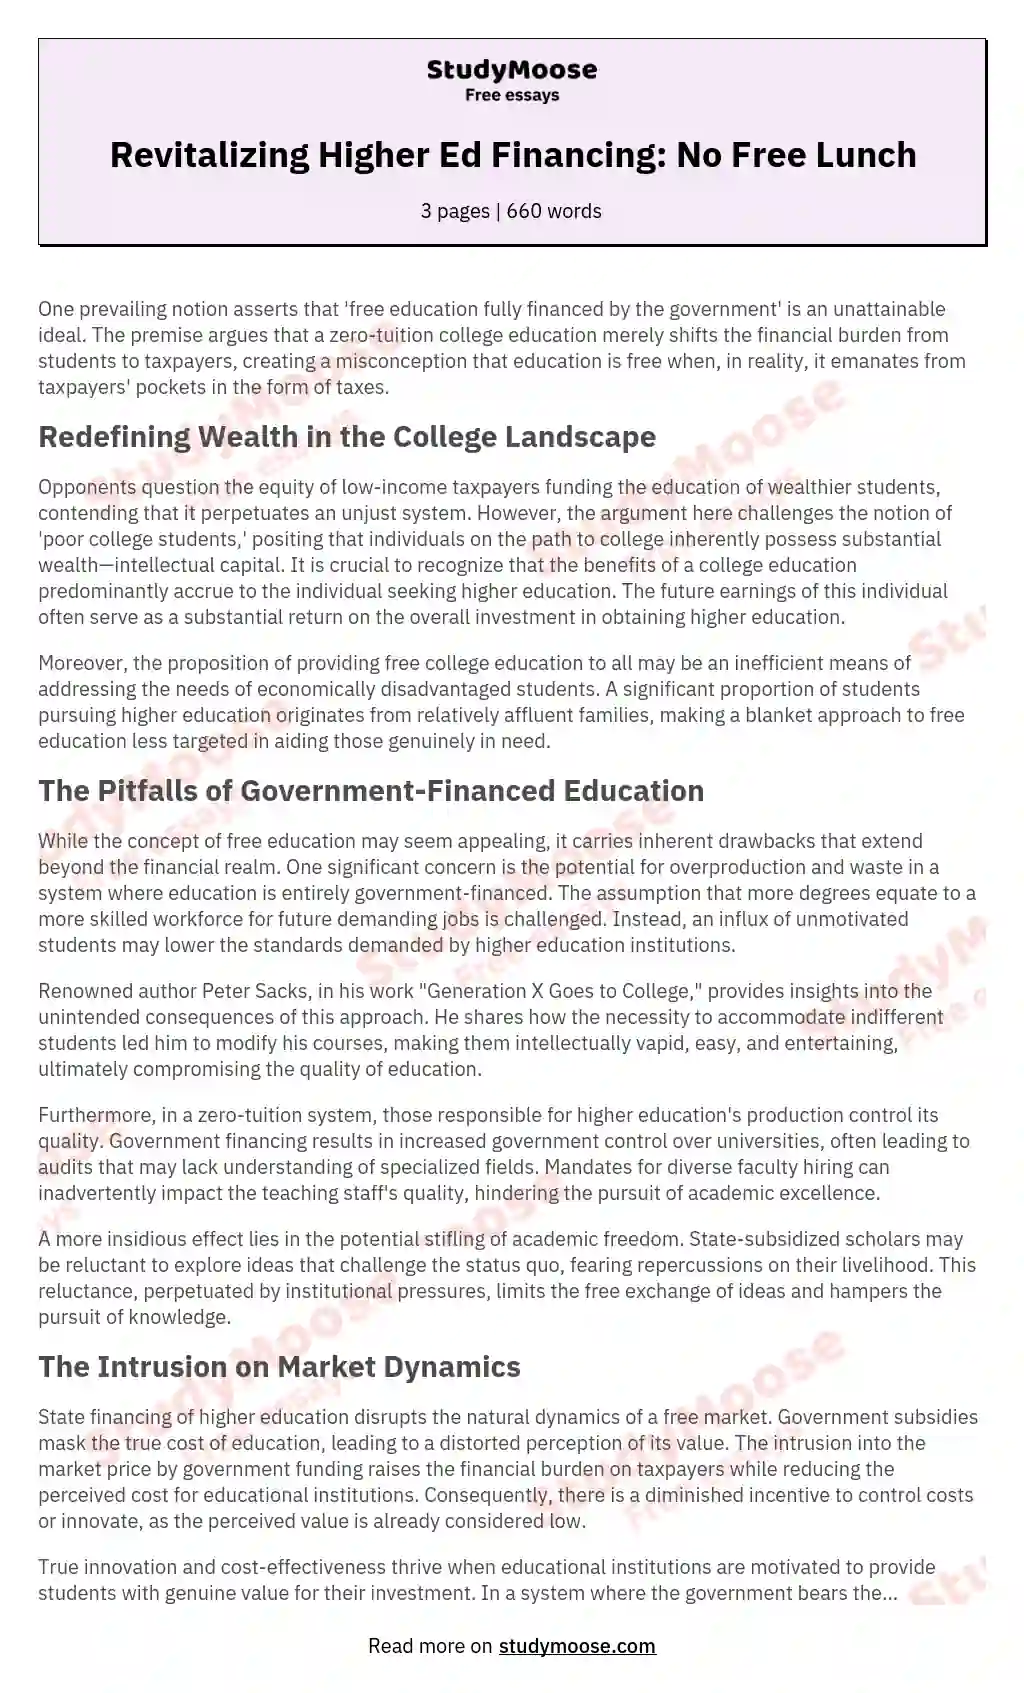 Revitalizing Higher Ed Financing: No Free Lunch essay